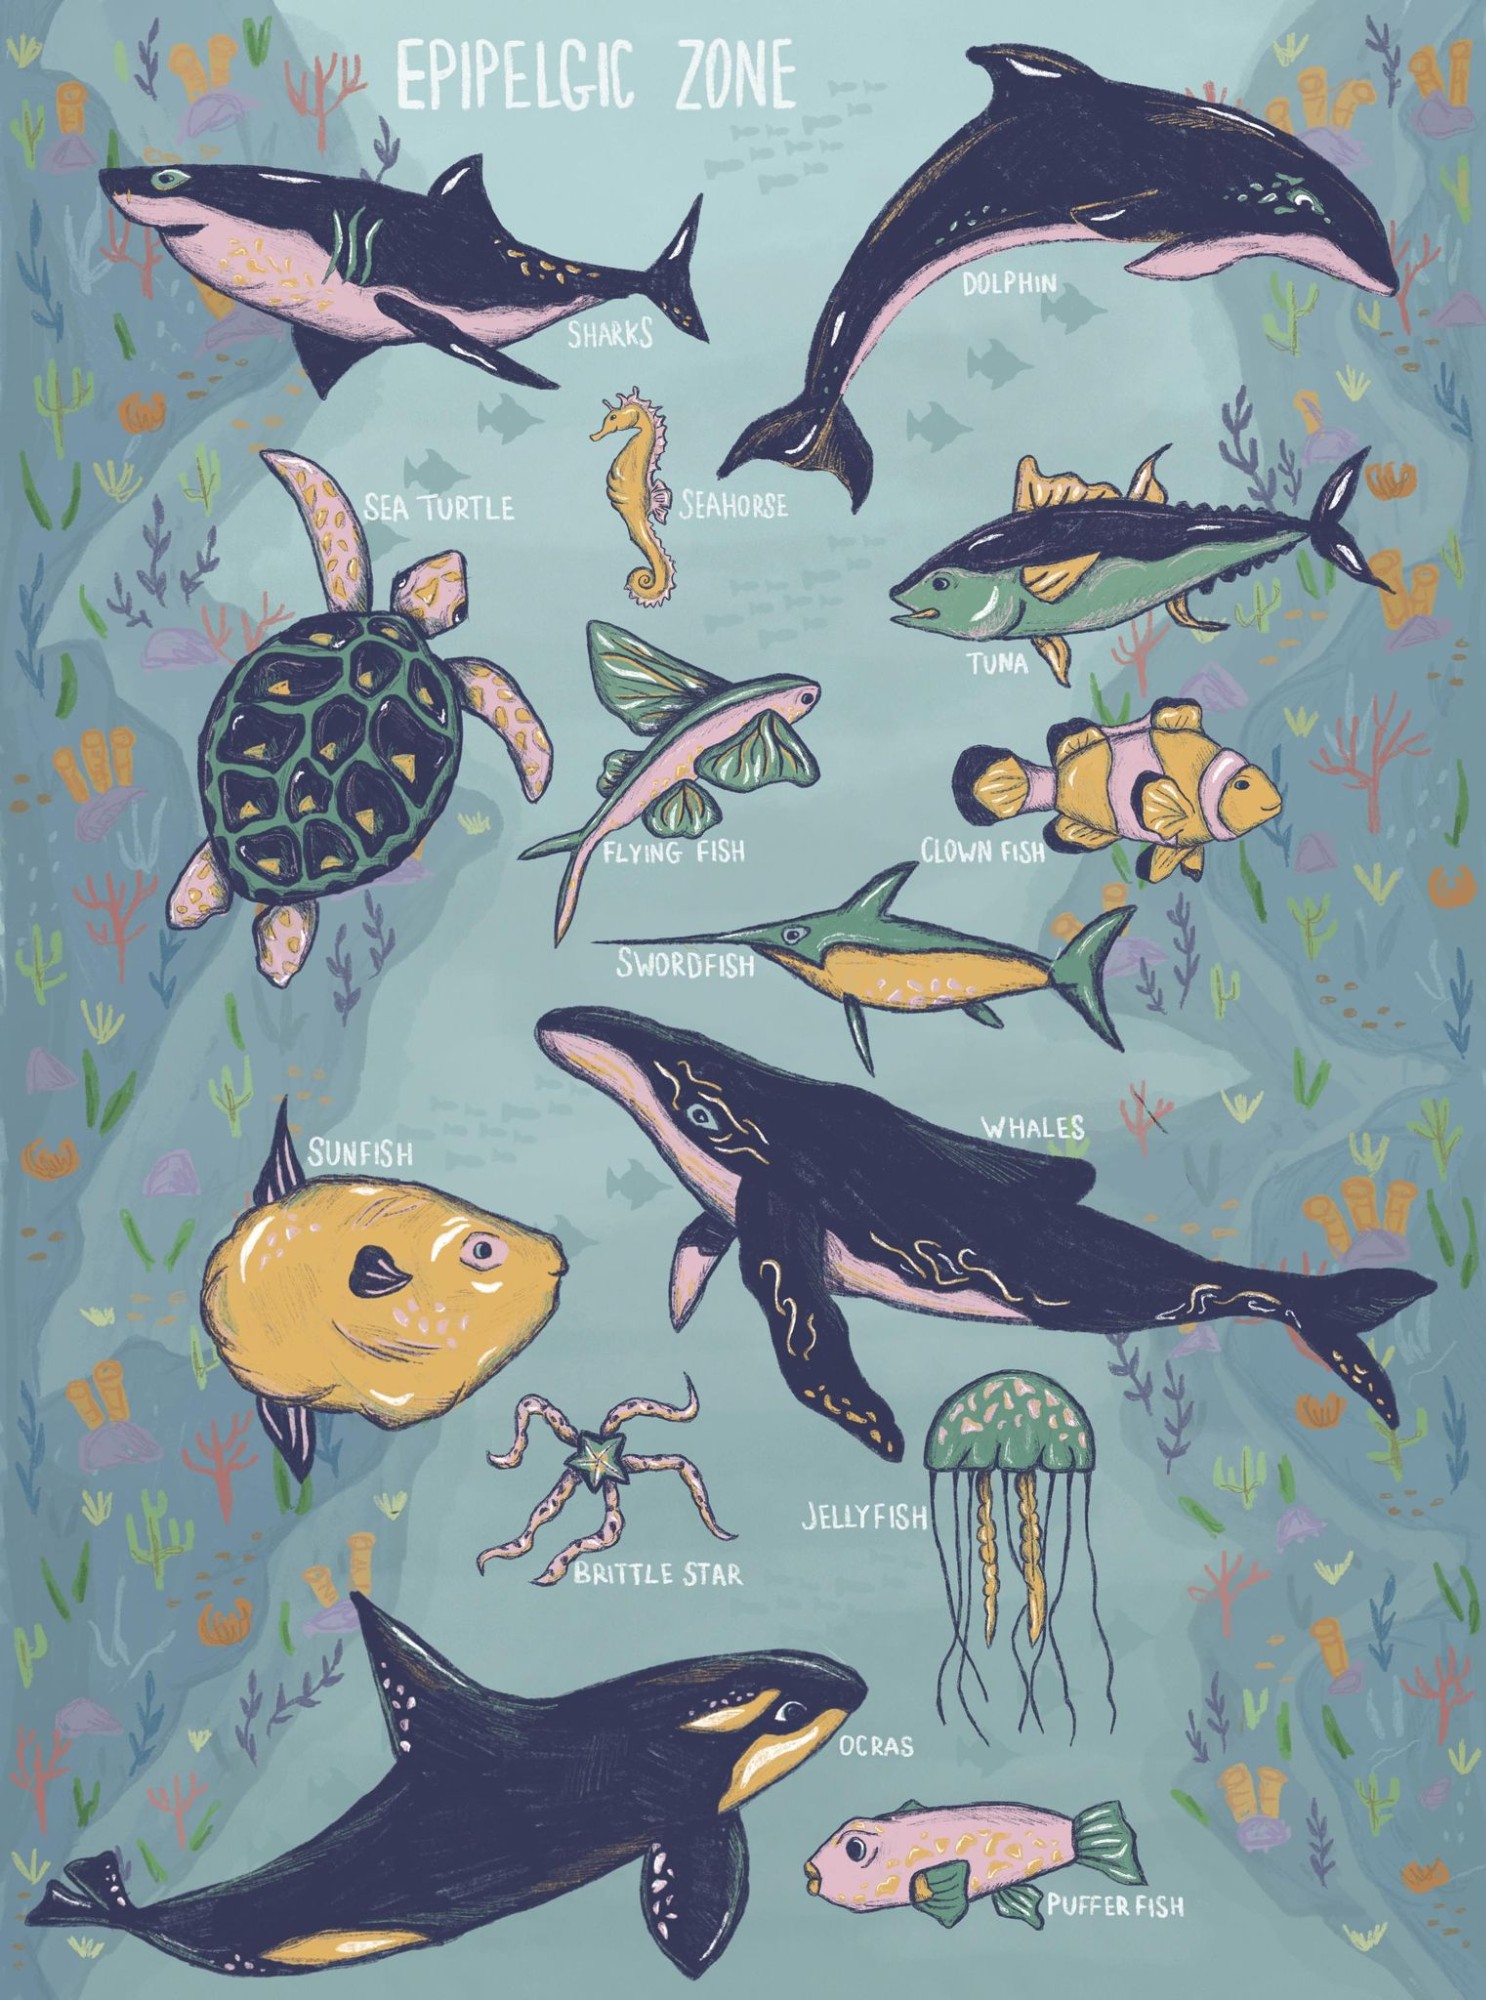 Digital poster design showing our sea life